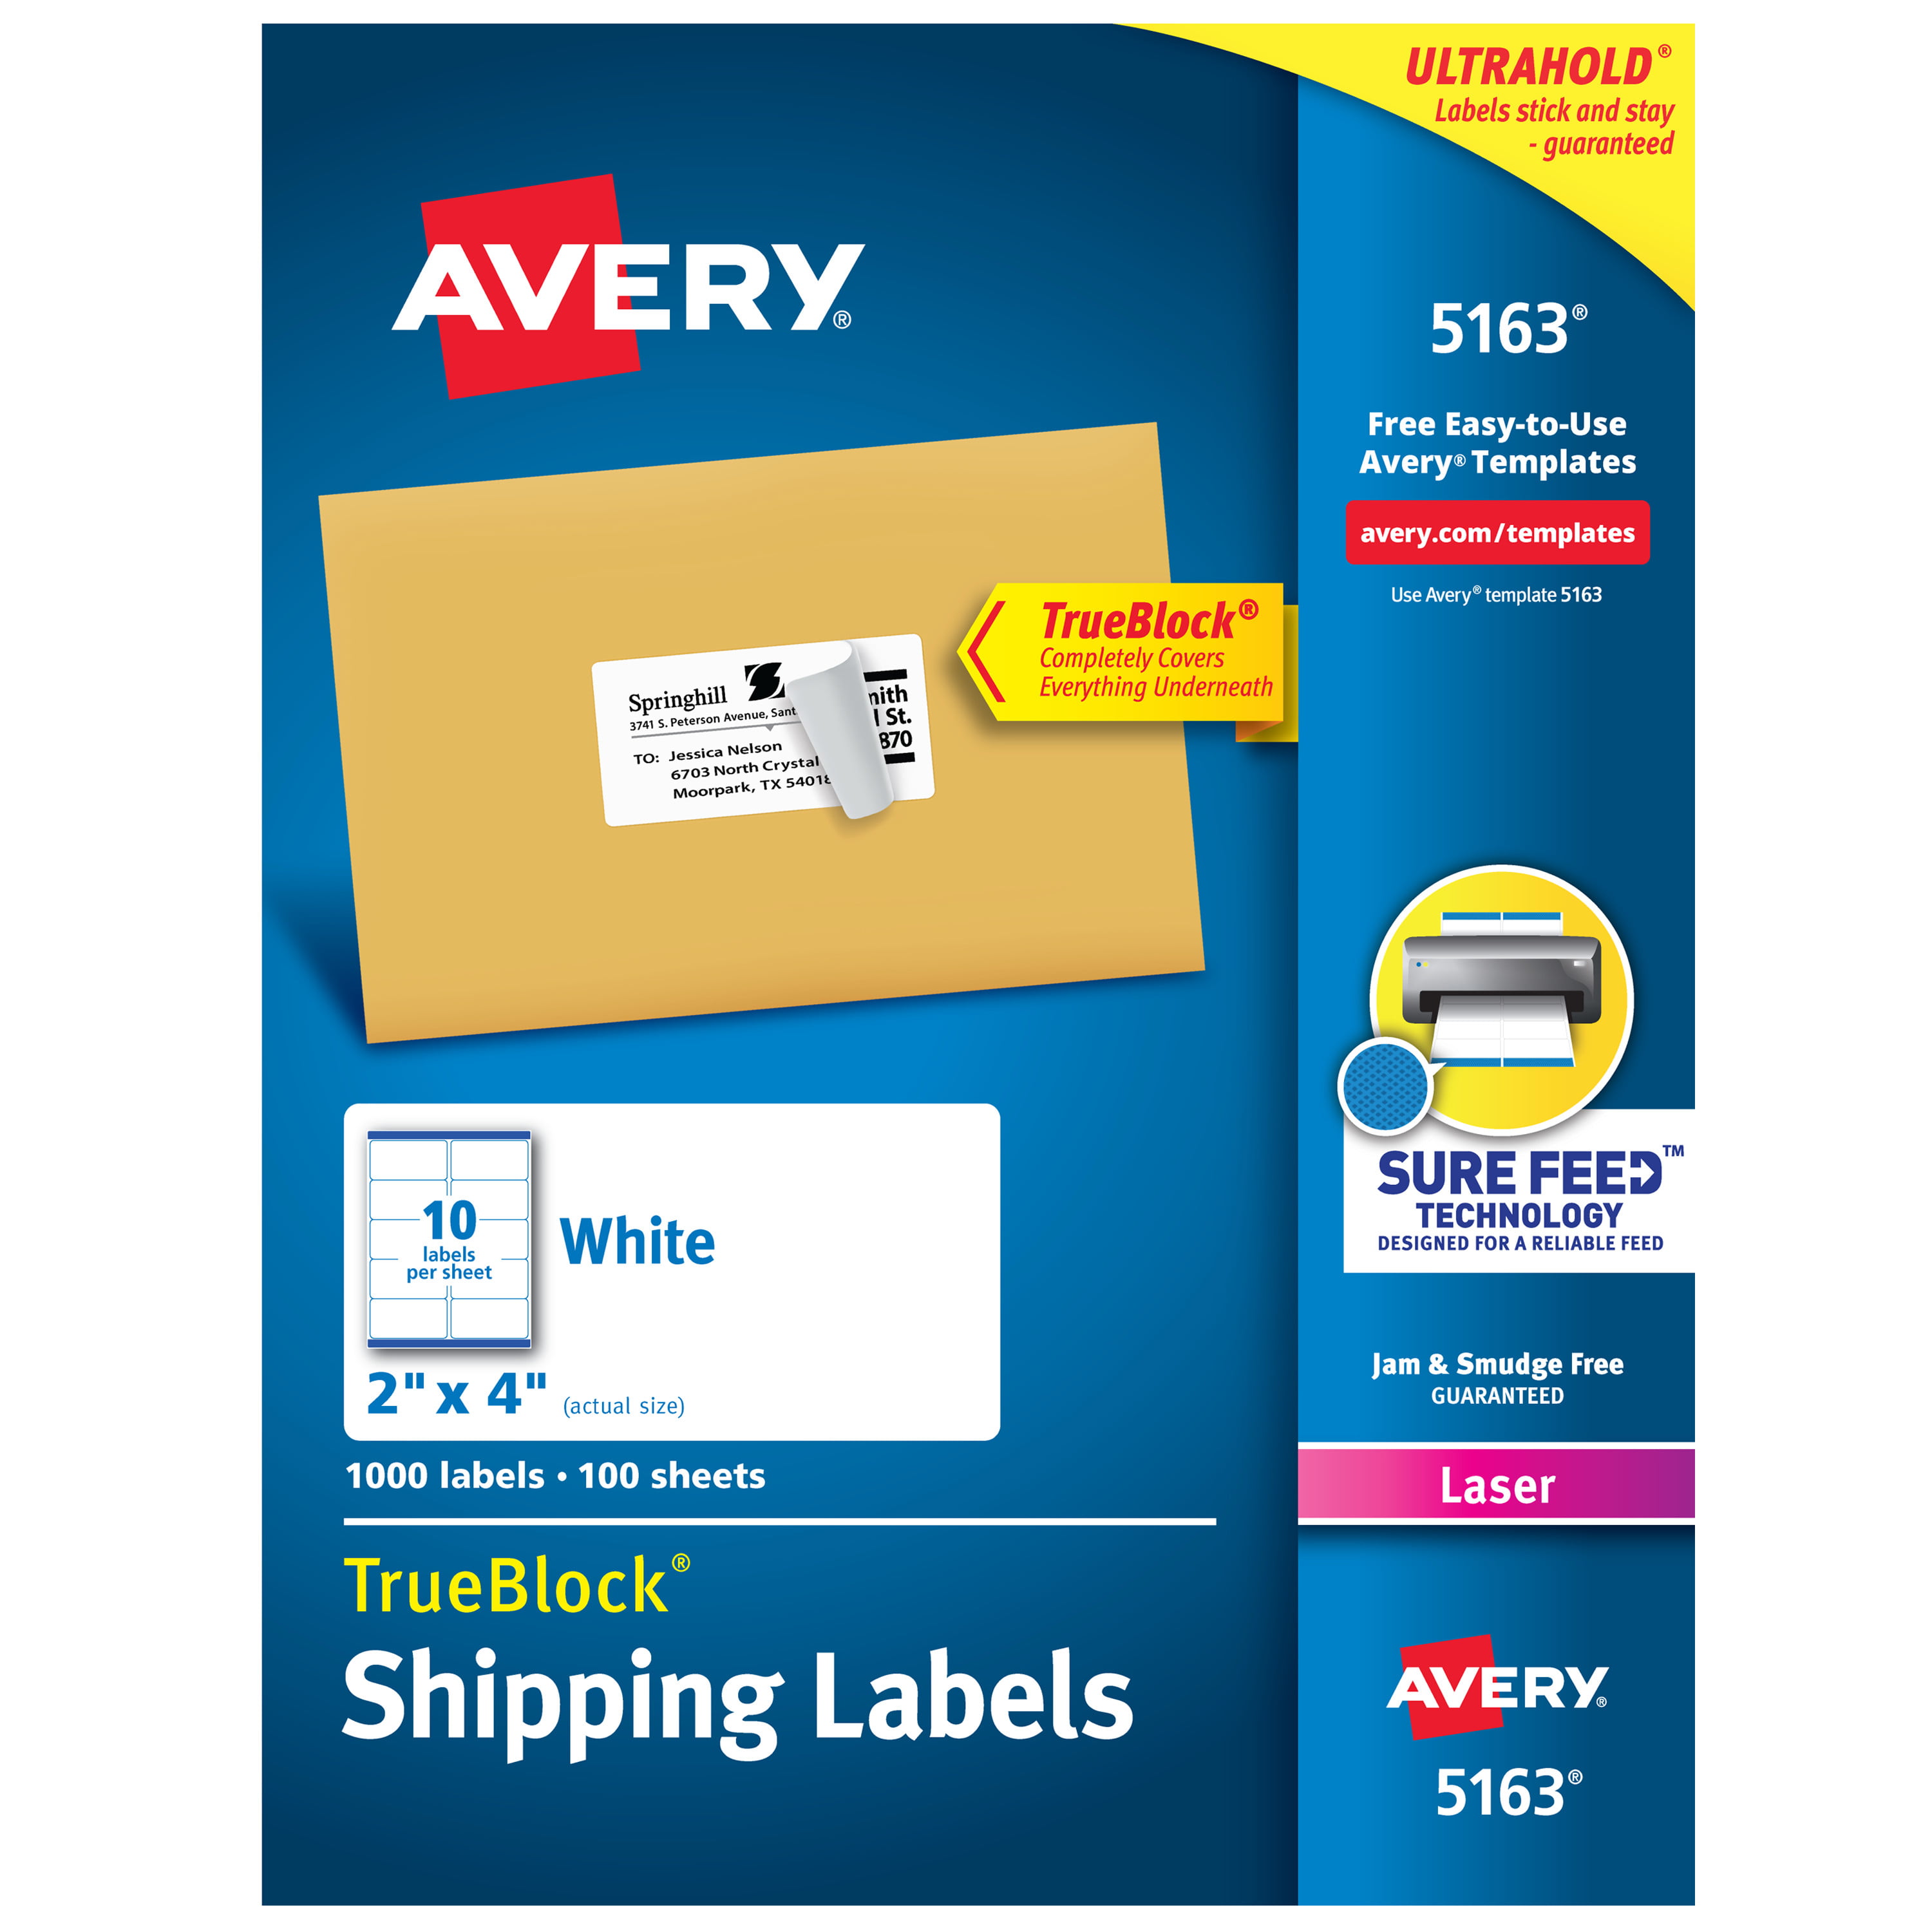 32 Avery 5360 Label Template Labels For Your Ideas